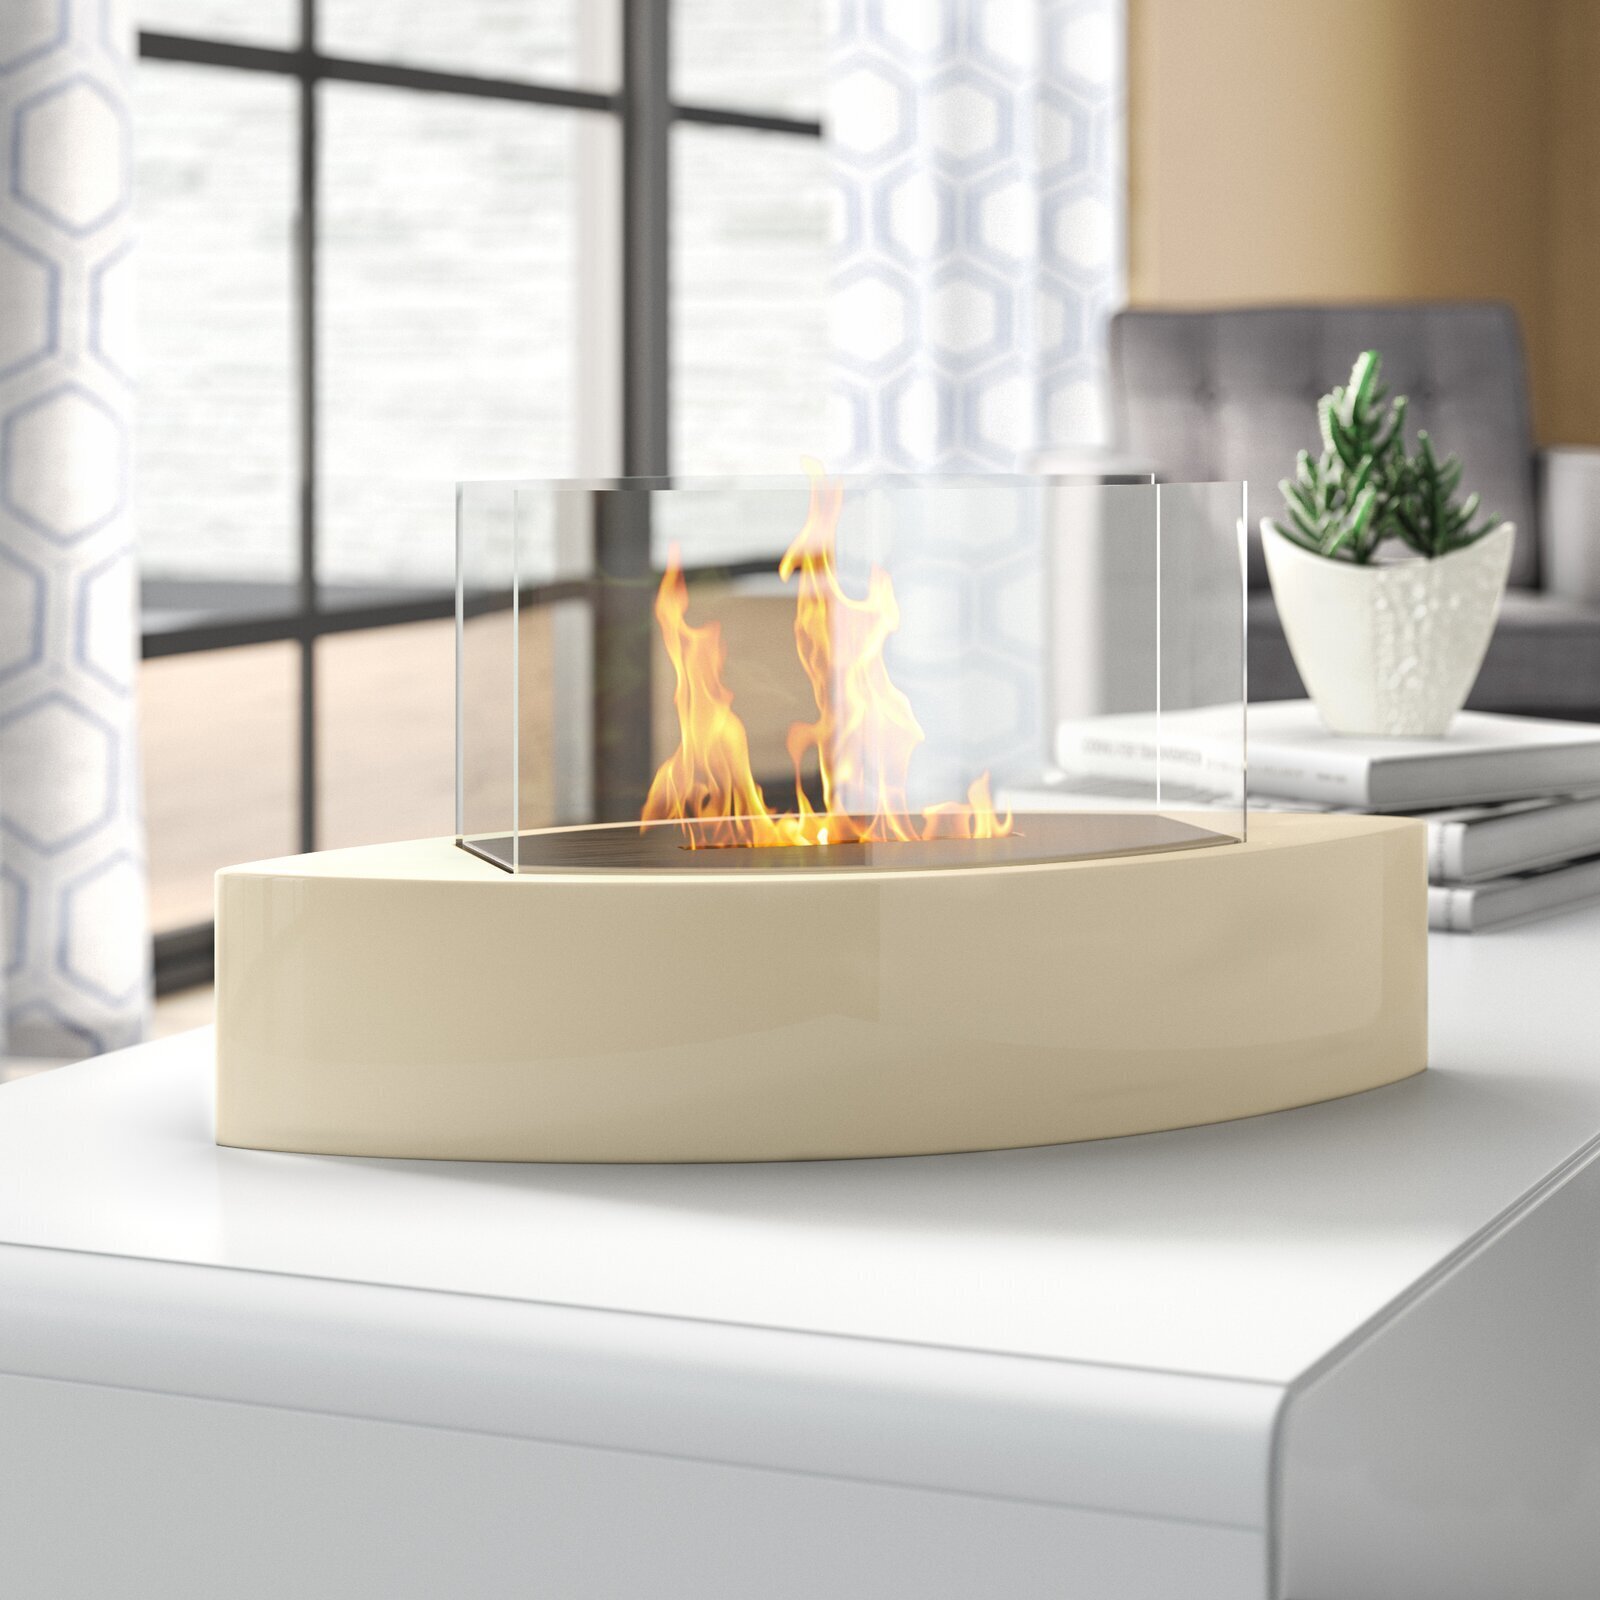 Free Form Tabletop Fireplace